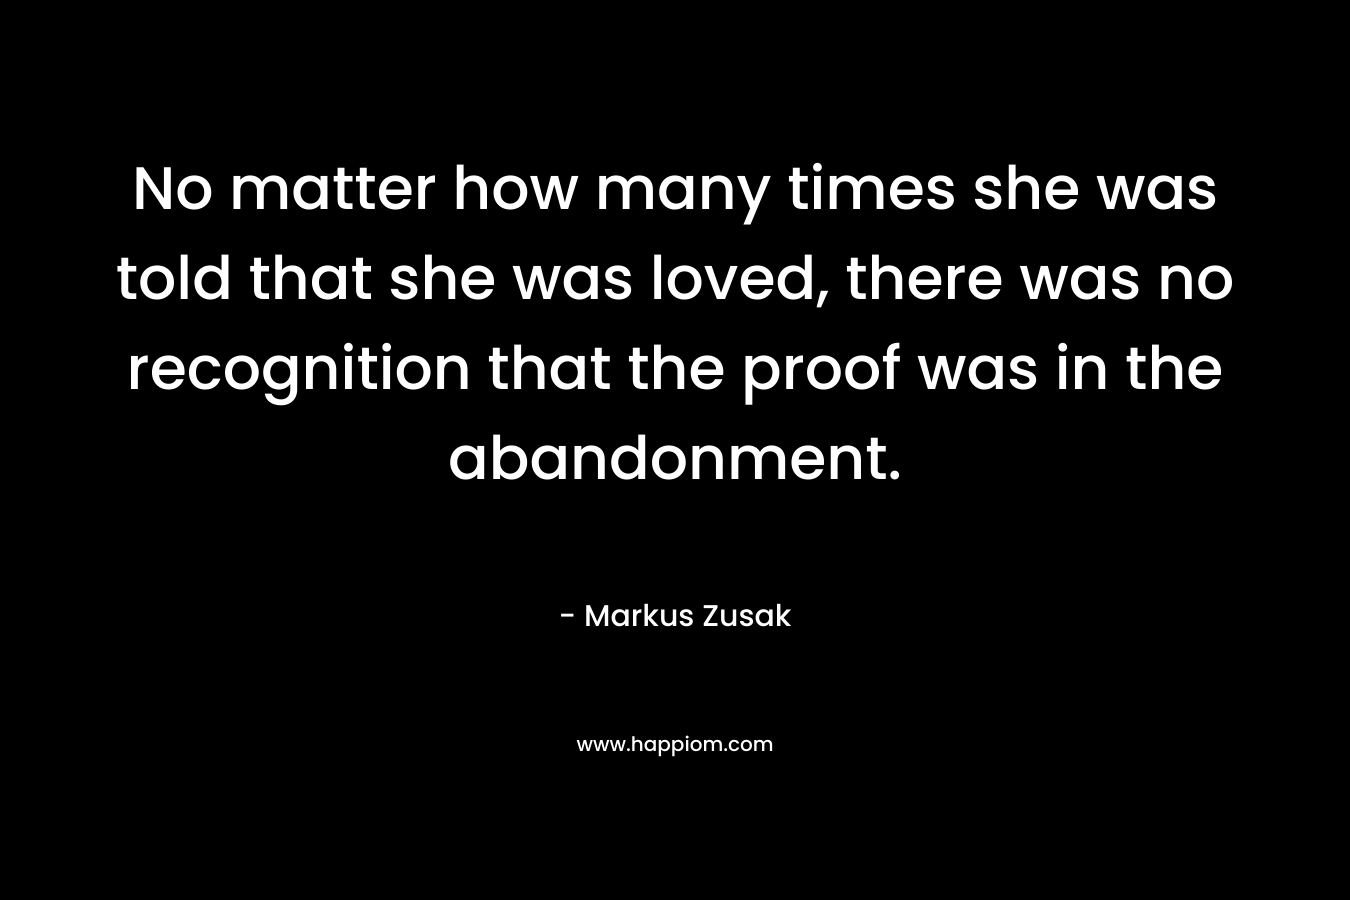 No matter how many times she was told that she was loved, there was no recognition that the proof was in the abandonment. – Markus Zusak